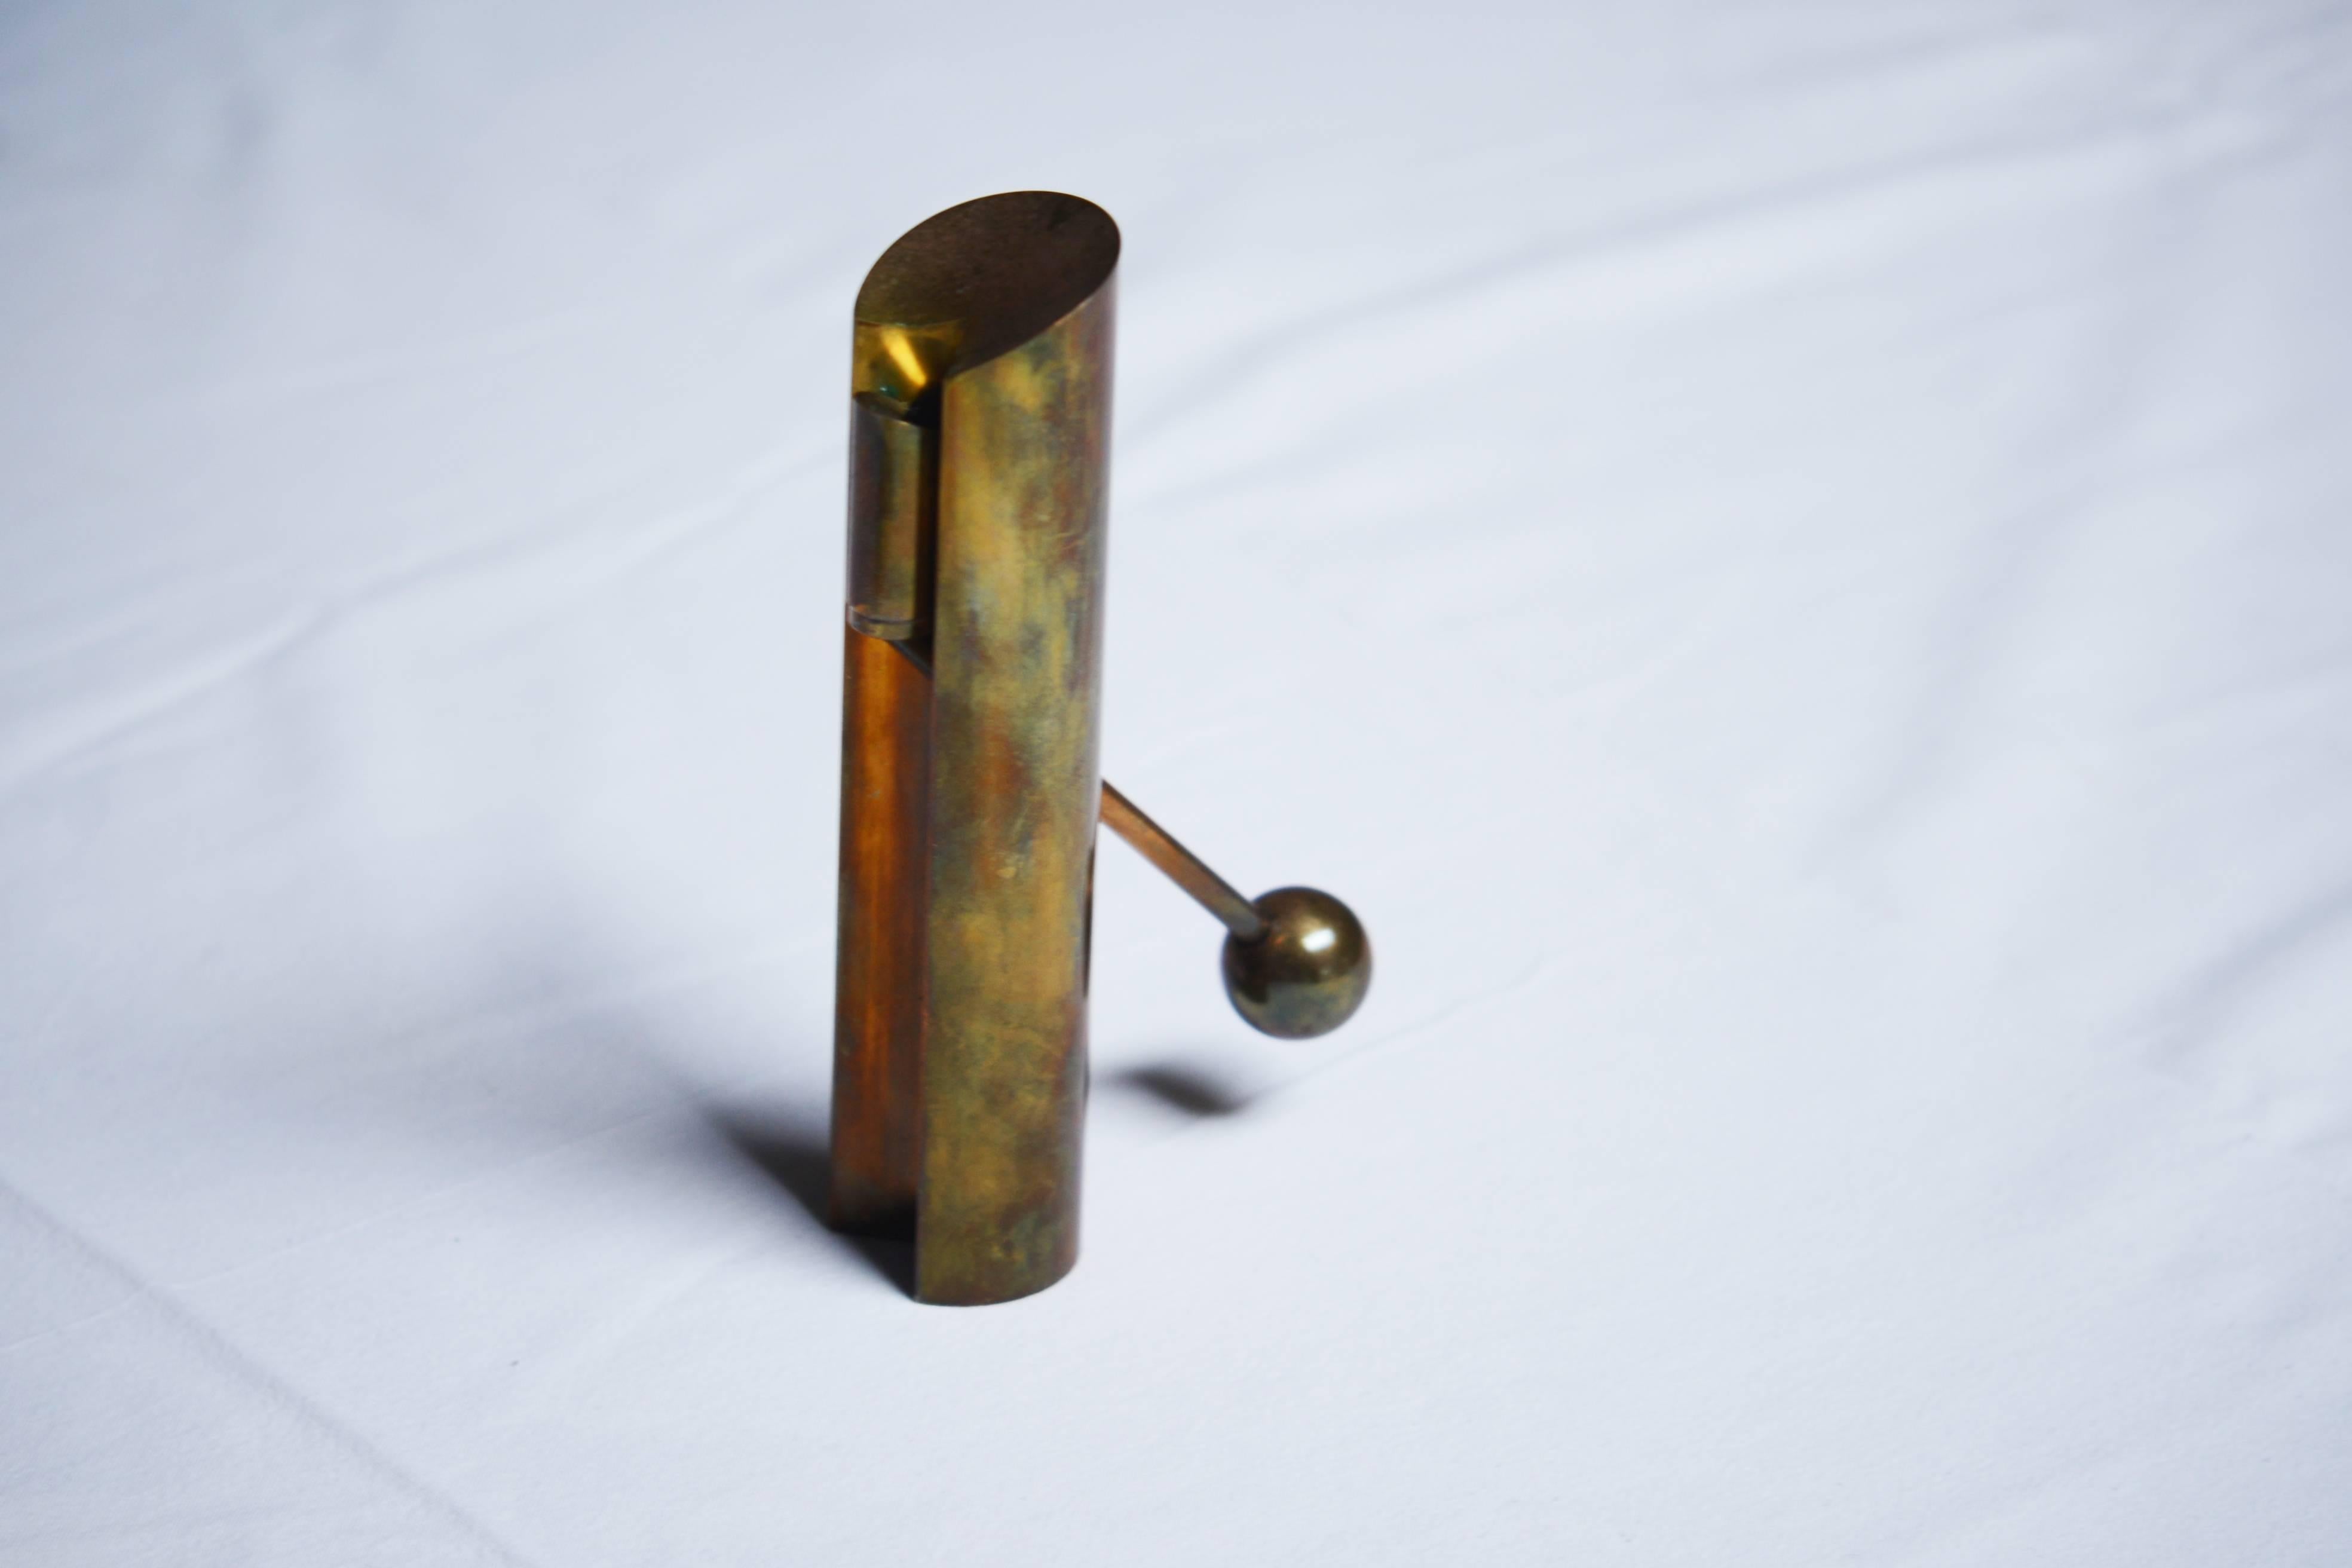 Pierre Forssell rare adjustable candlestick made by Skultuna, Sweden.

Pierre Forssell was employed at the Skultuna manufacture from 1955-1986. He worked with brass and developed modern and sculptural form to lamps, candlesticks and different